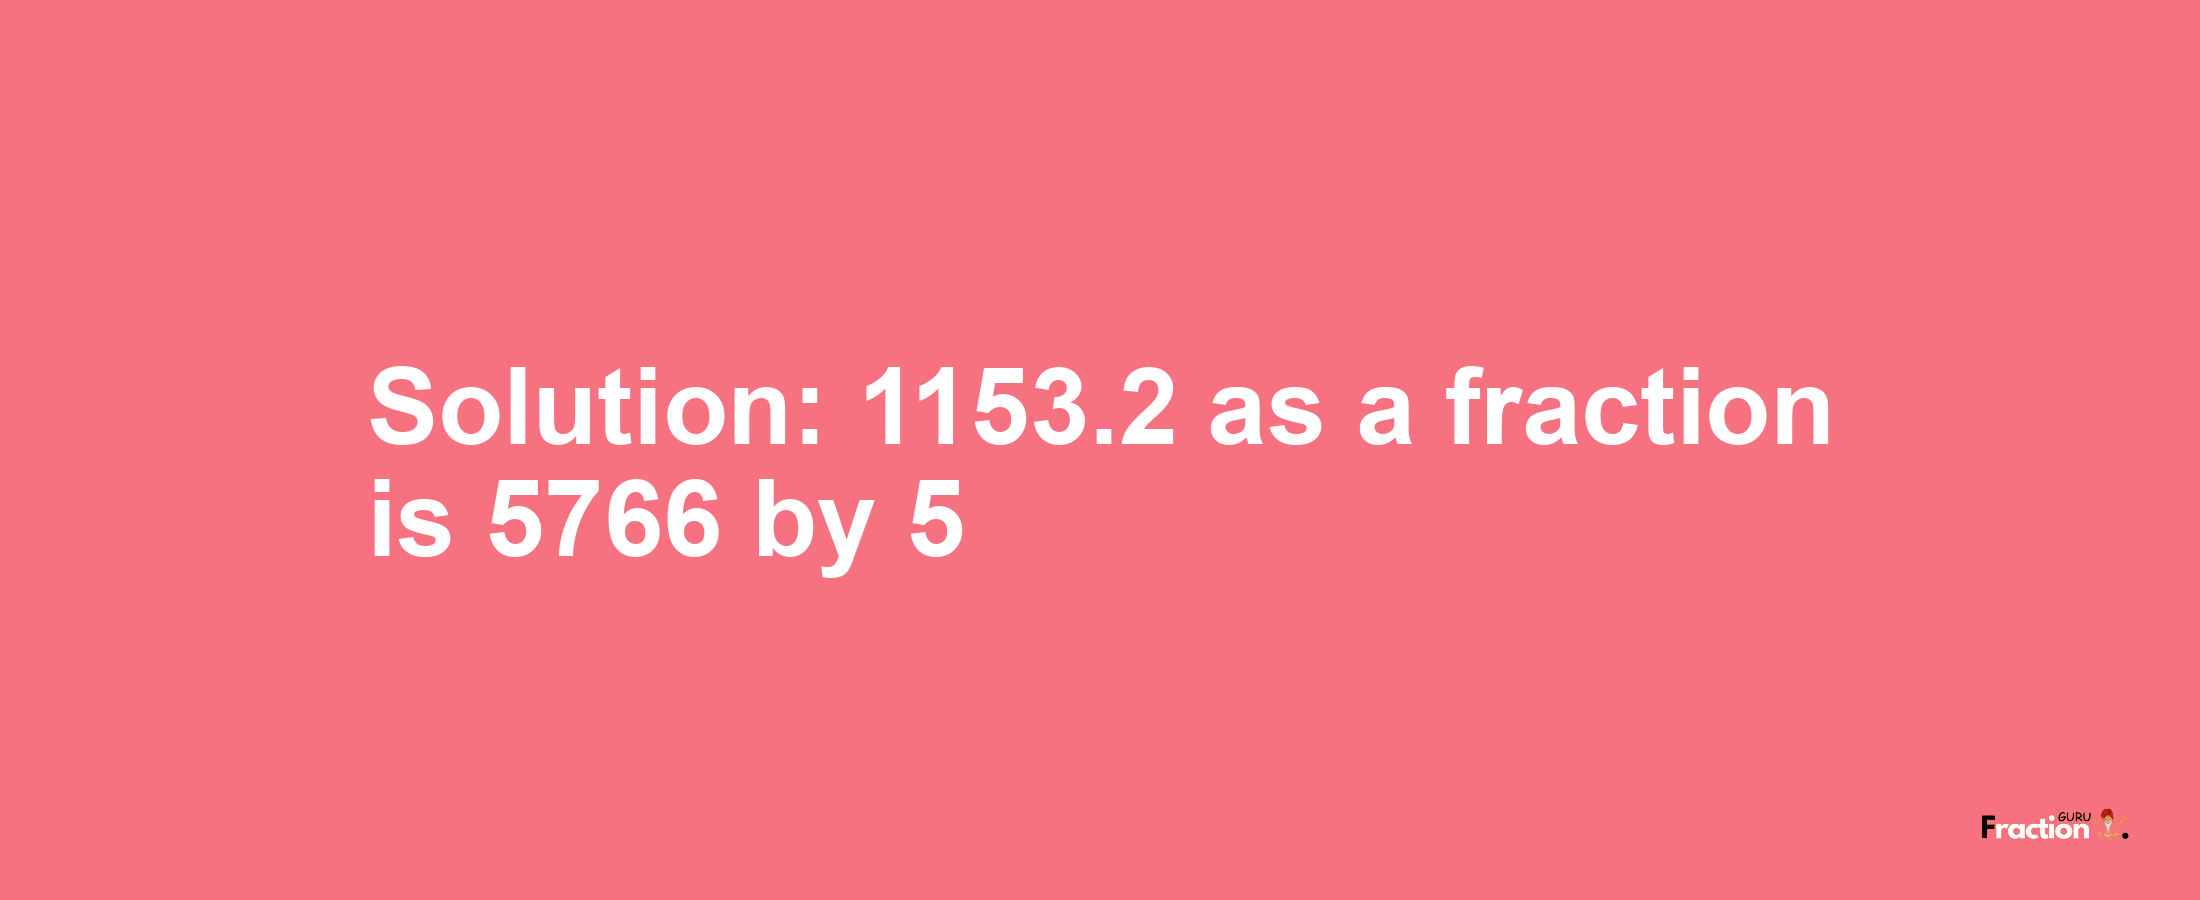 Solution:1153.2 as a fraction is 5766/5